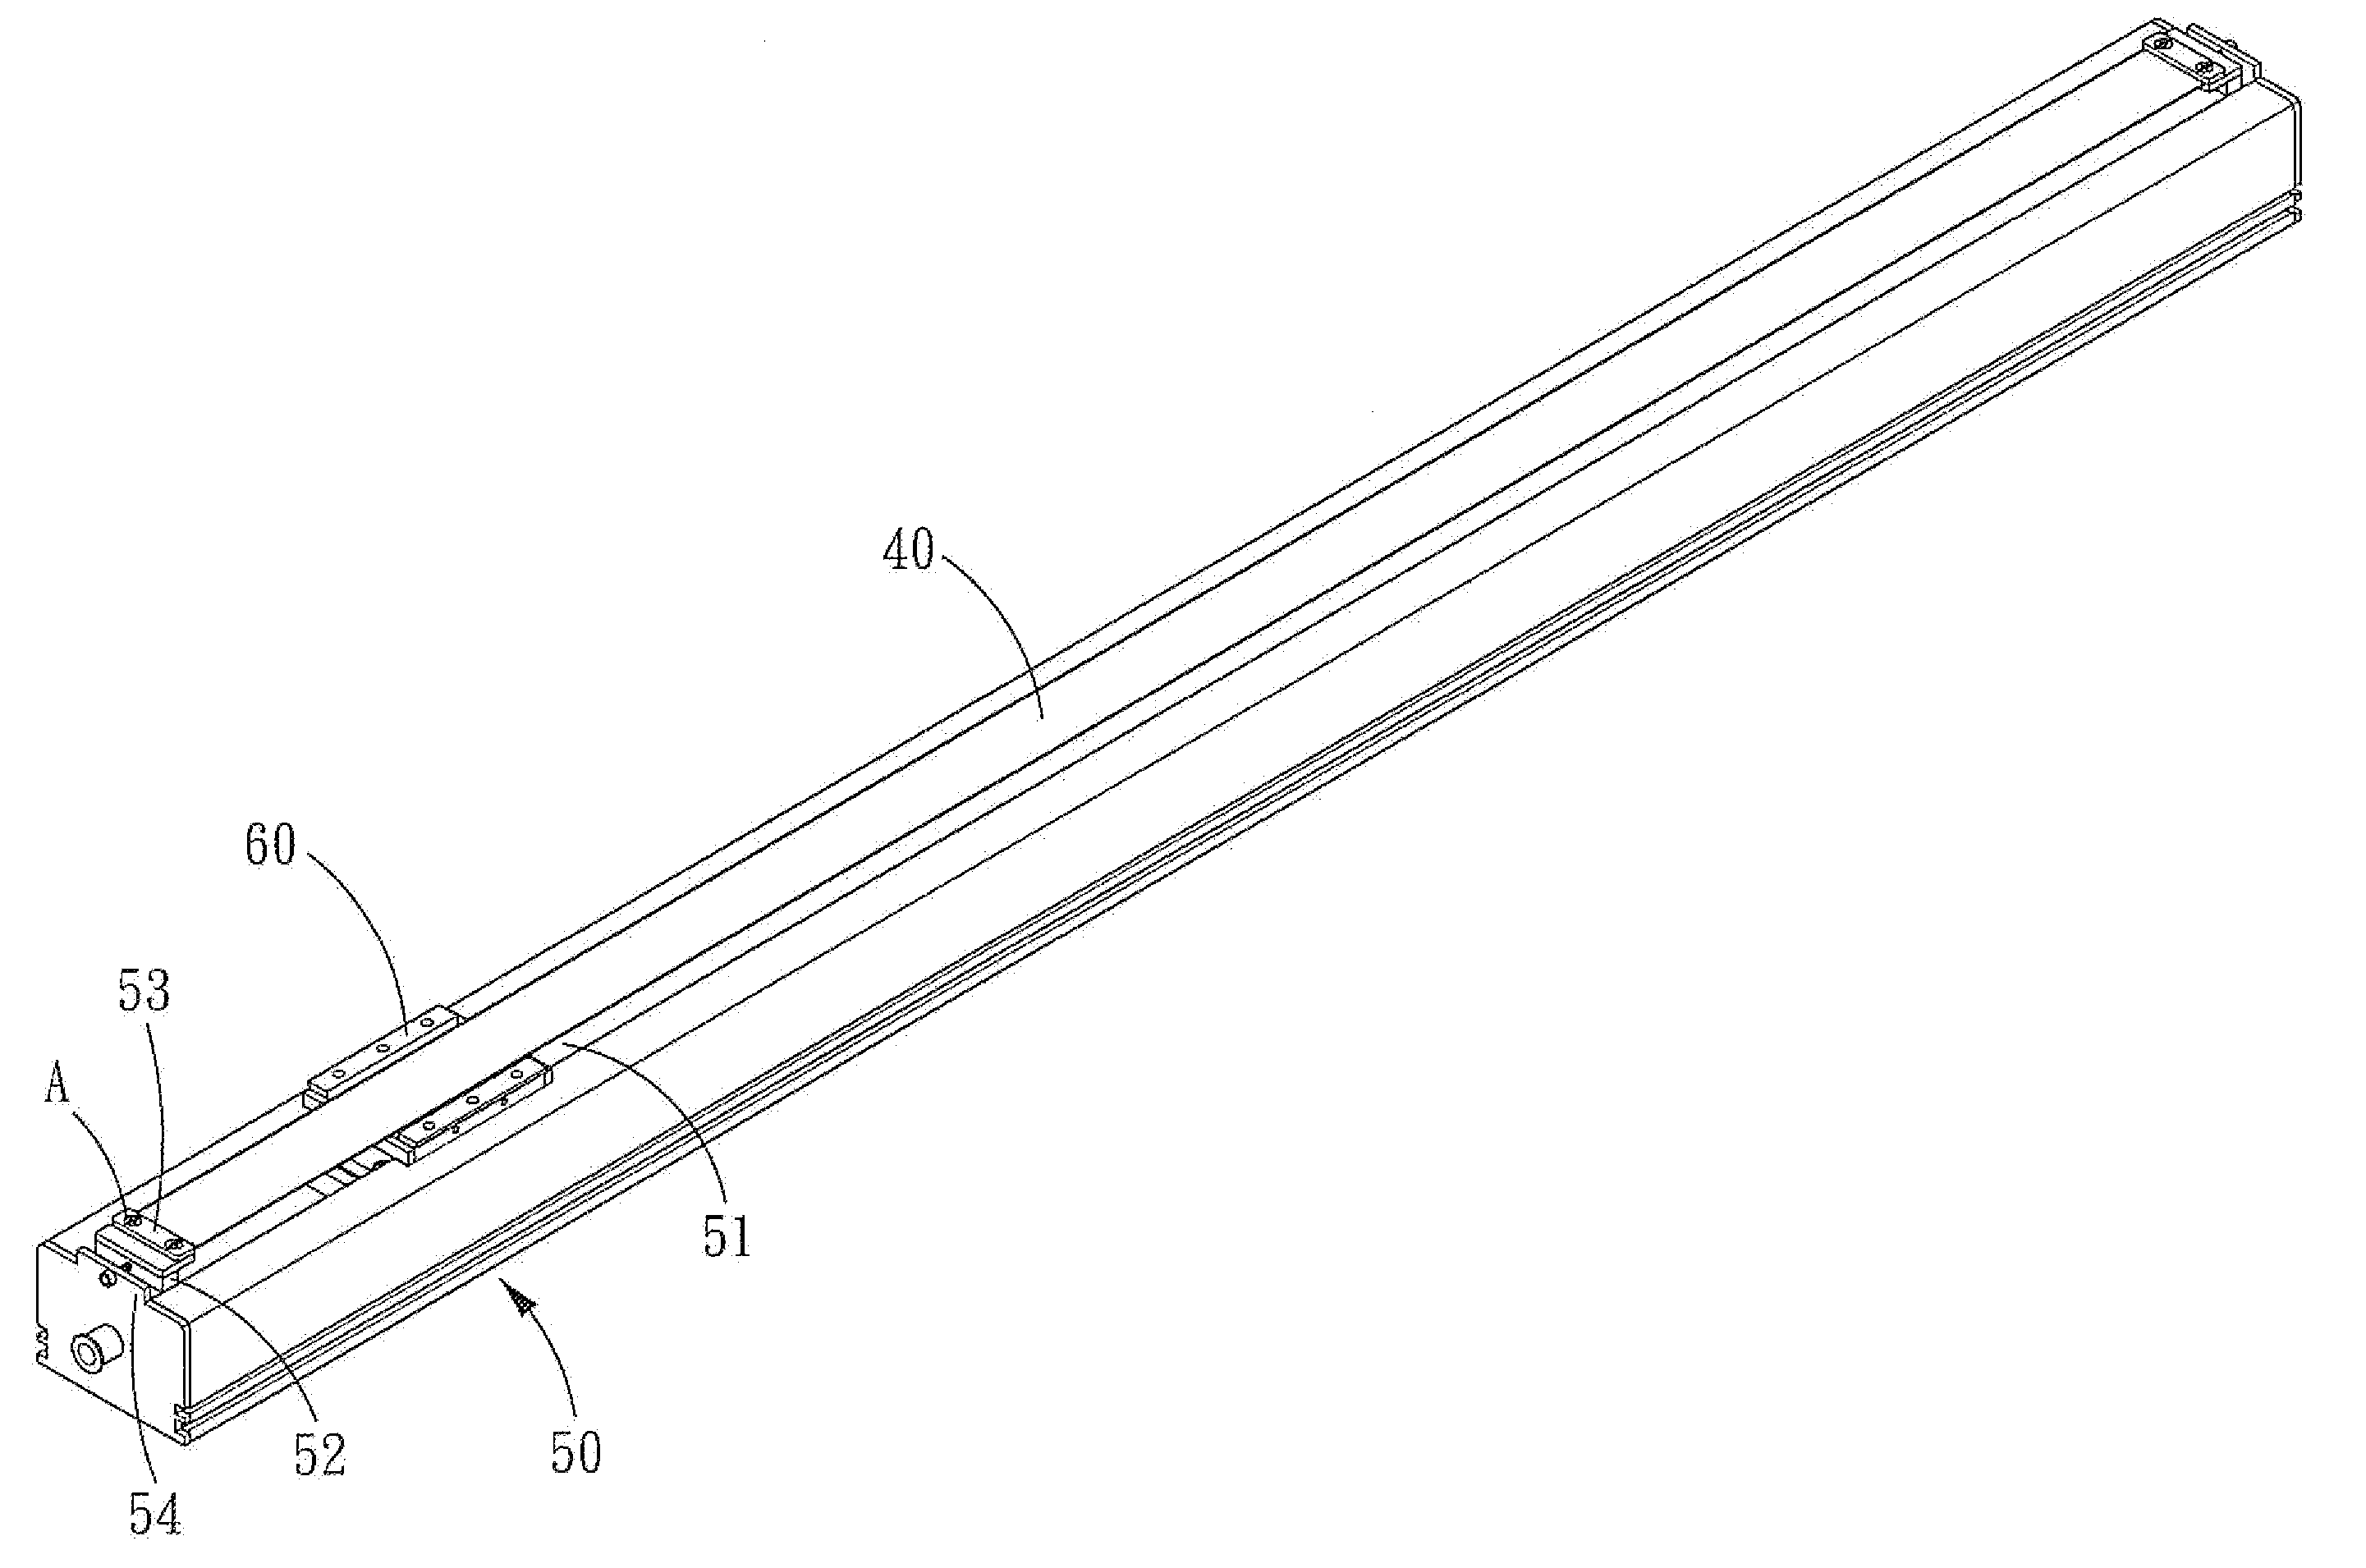 Linear Table with an Adjustable Dust-proof Structure